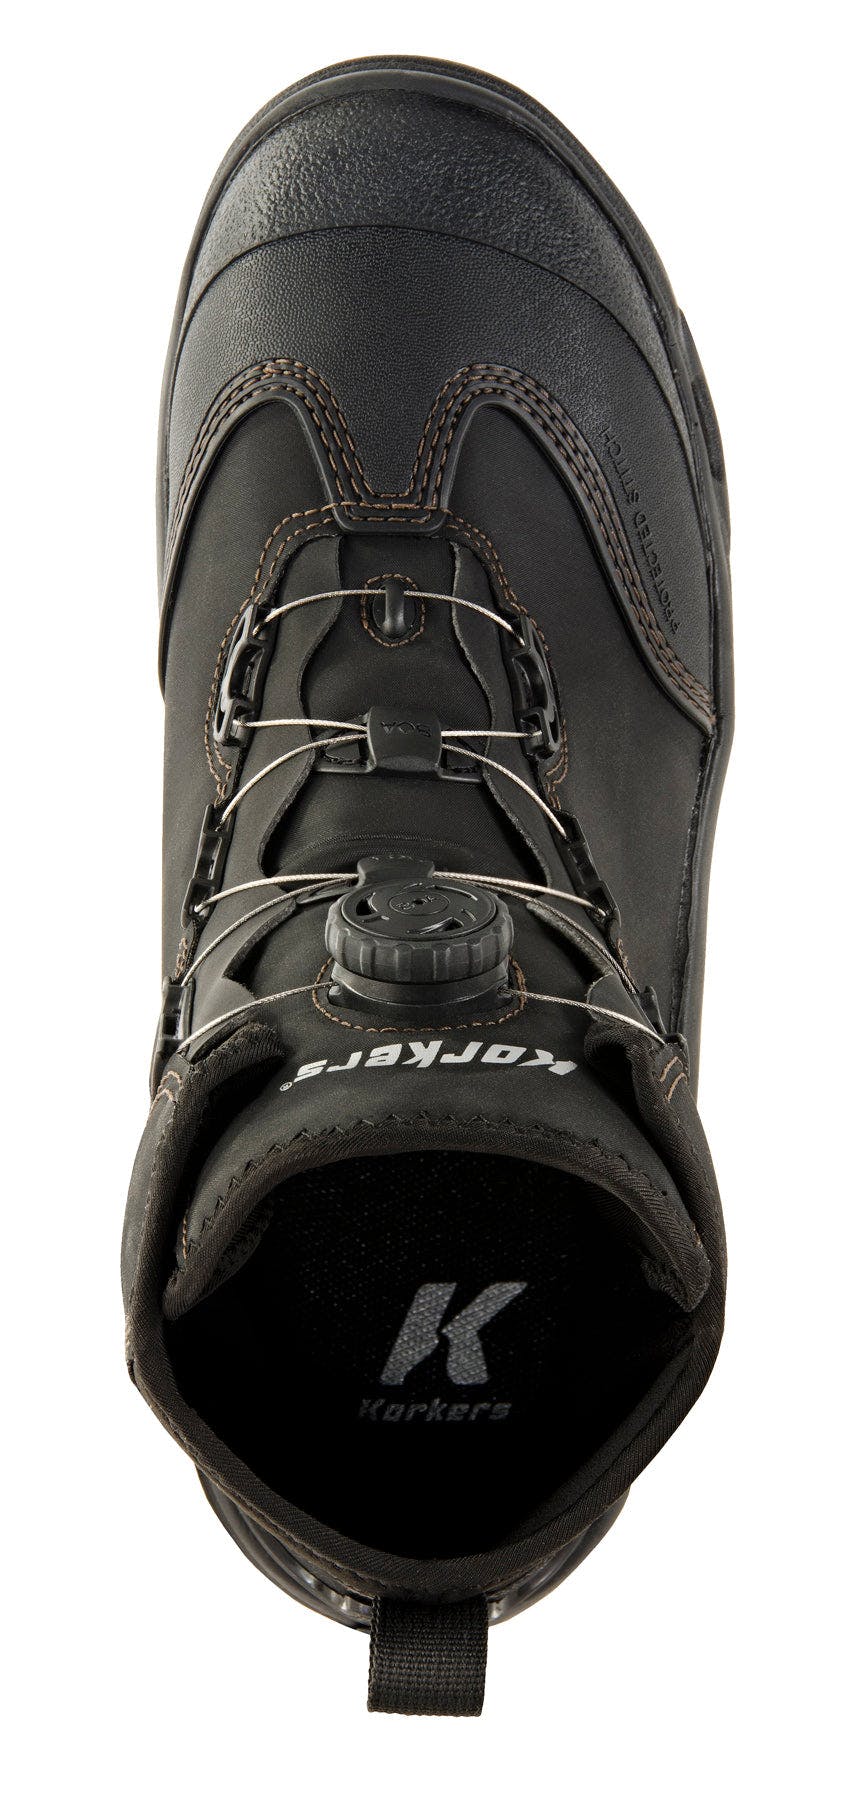 Korkers Devils Canyon Boot